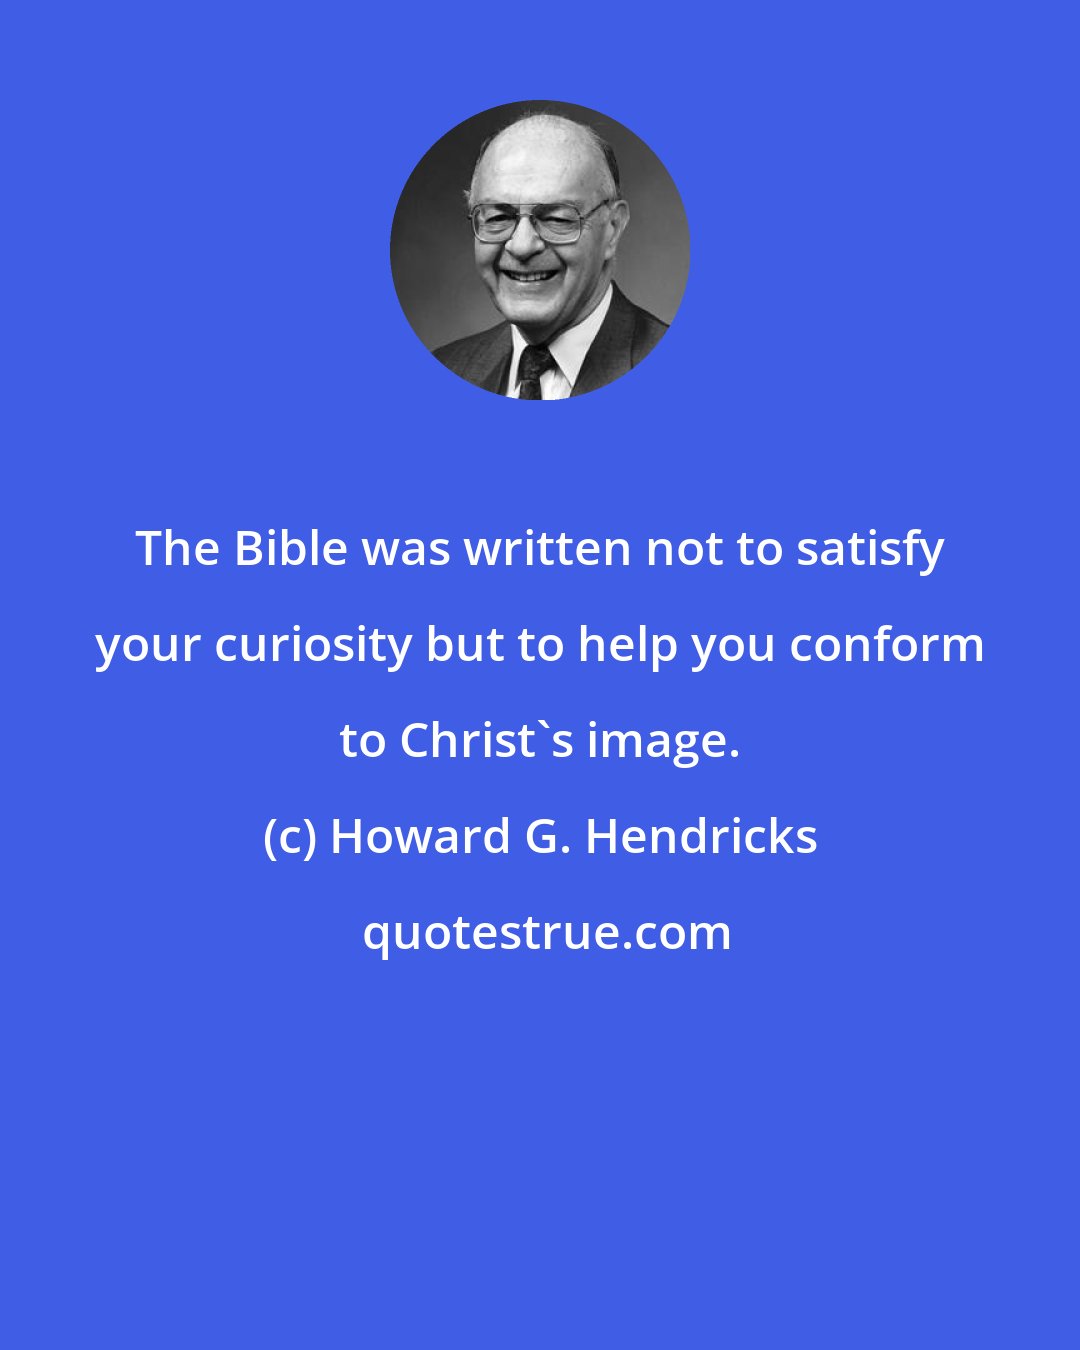 Howard G. Hendricks: The Bible was written not to satisfy your curiosity but to help you conform to Christ's image.